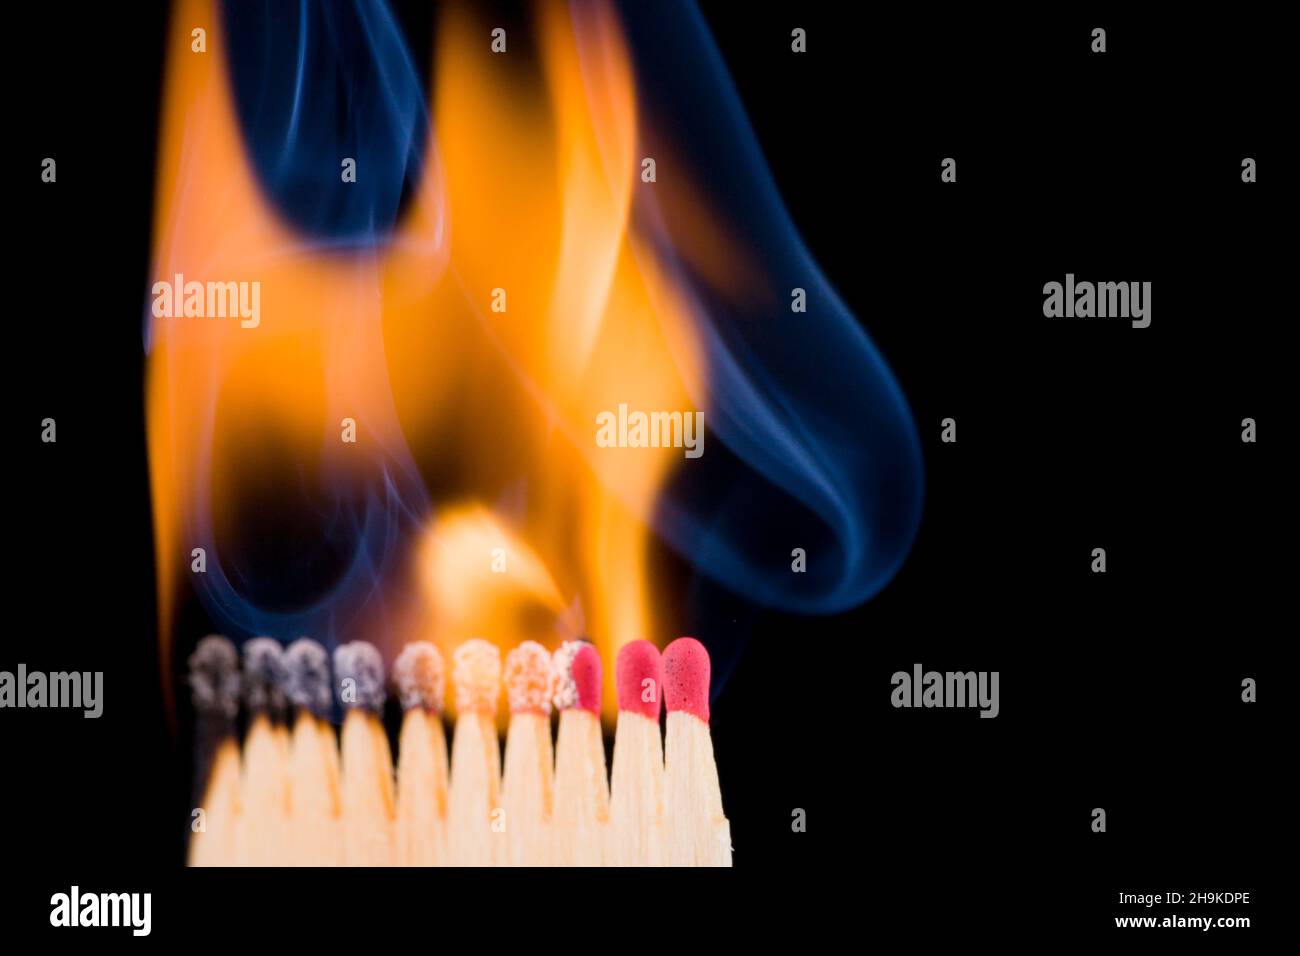 match, domino, matchstick, fire, matches, spread, infect, smoke, beginning, burning, ten, small, black boy, domino effect, effect, flame, flames, spar Stock Photo